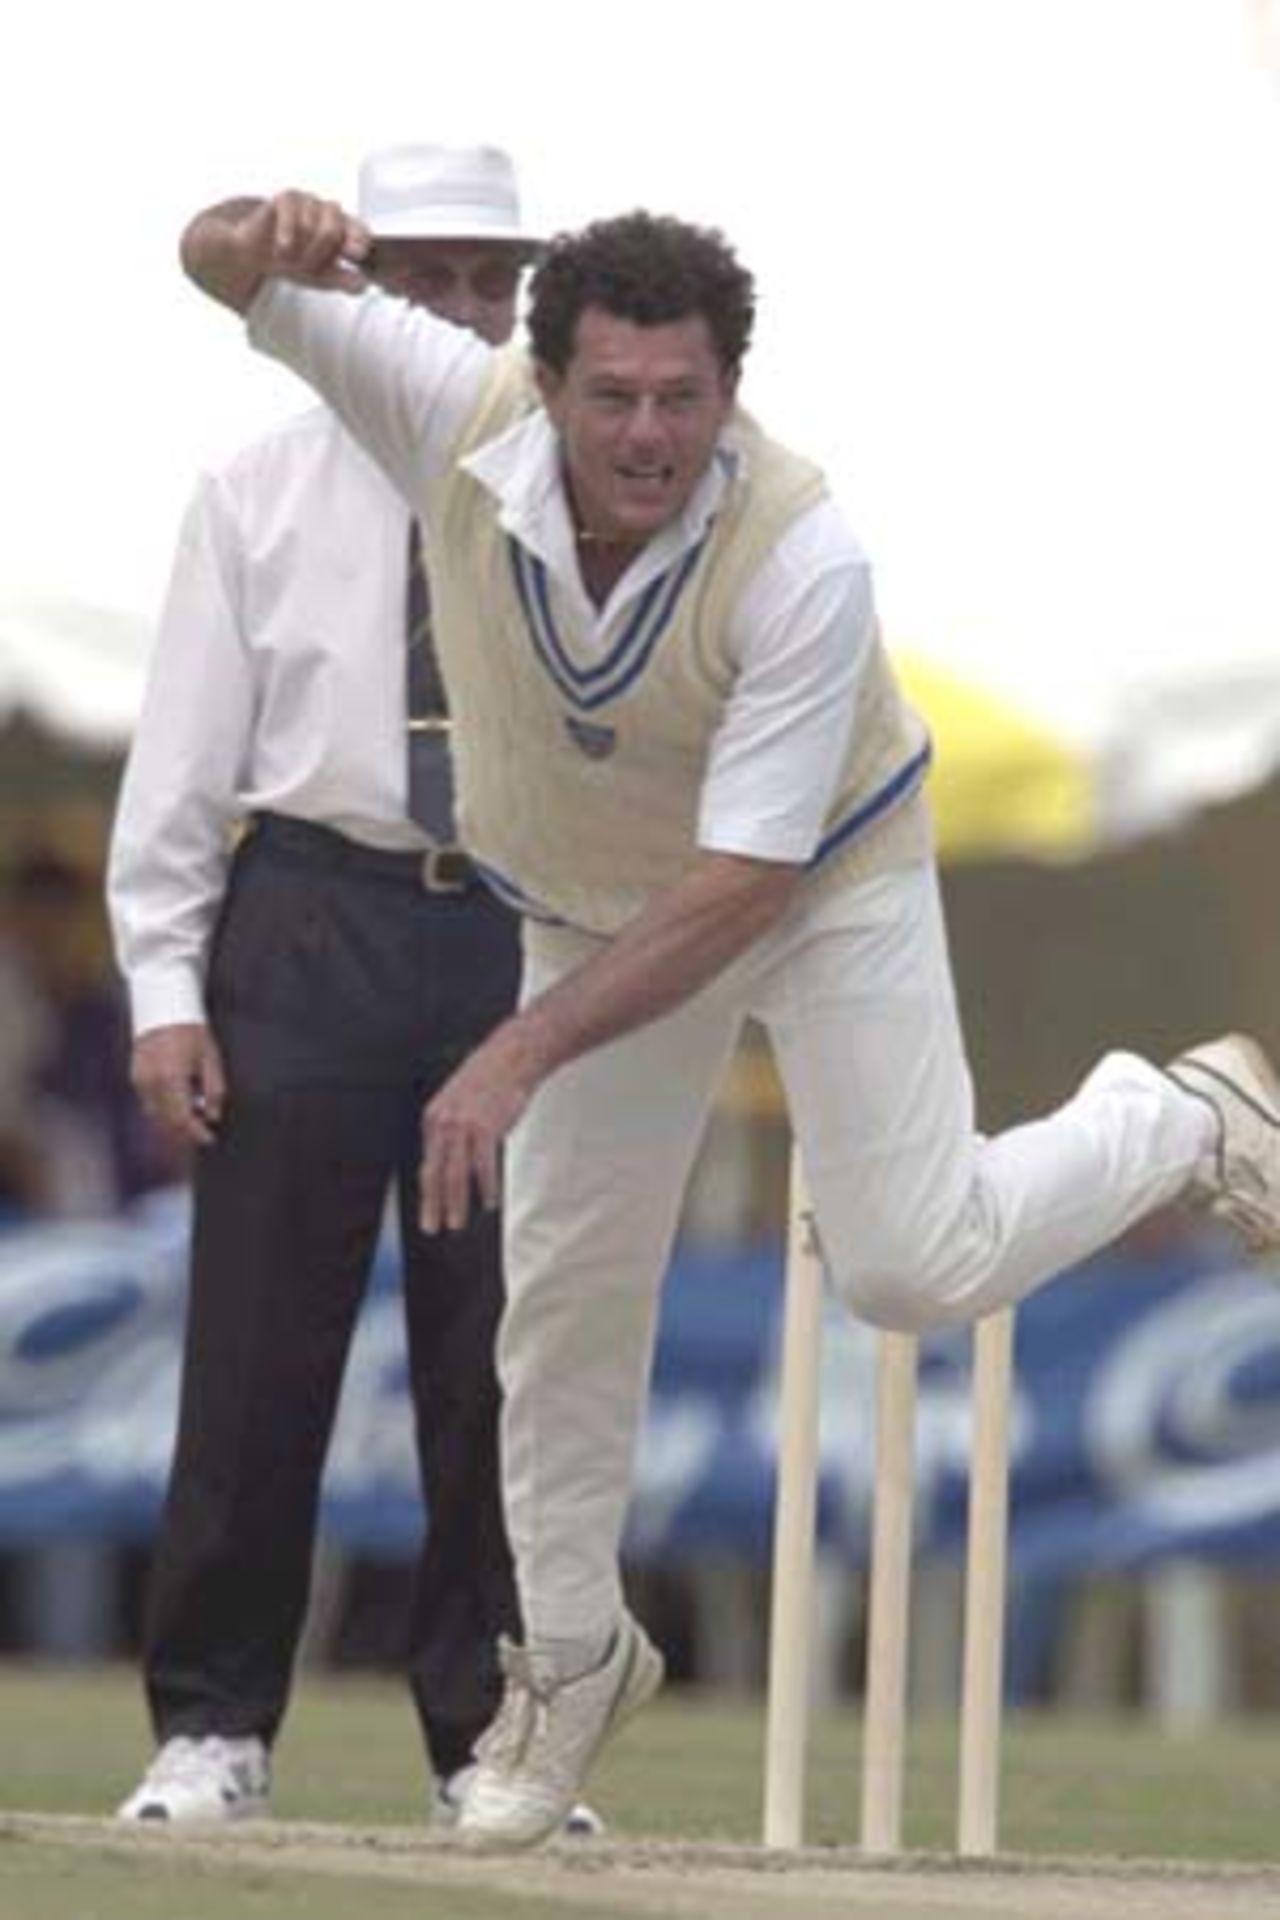 07 Nov 2000: Mike Whitney for the Chairman's XI in the match between the Australian Cricket Board's Chairman's XI and the West Indies at LilacHill in Perth, Australia.